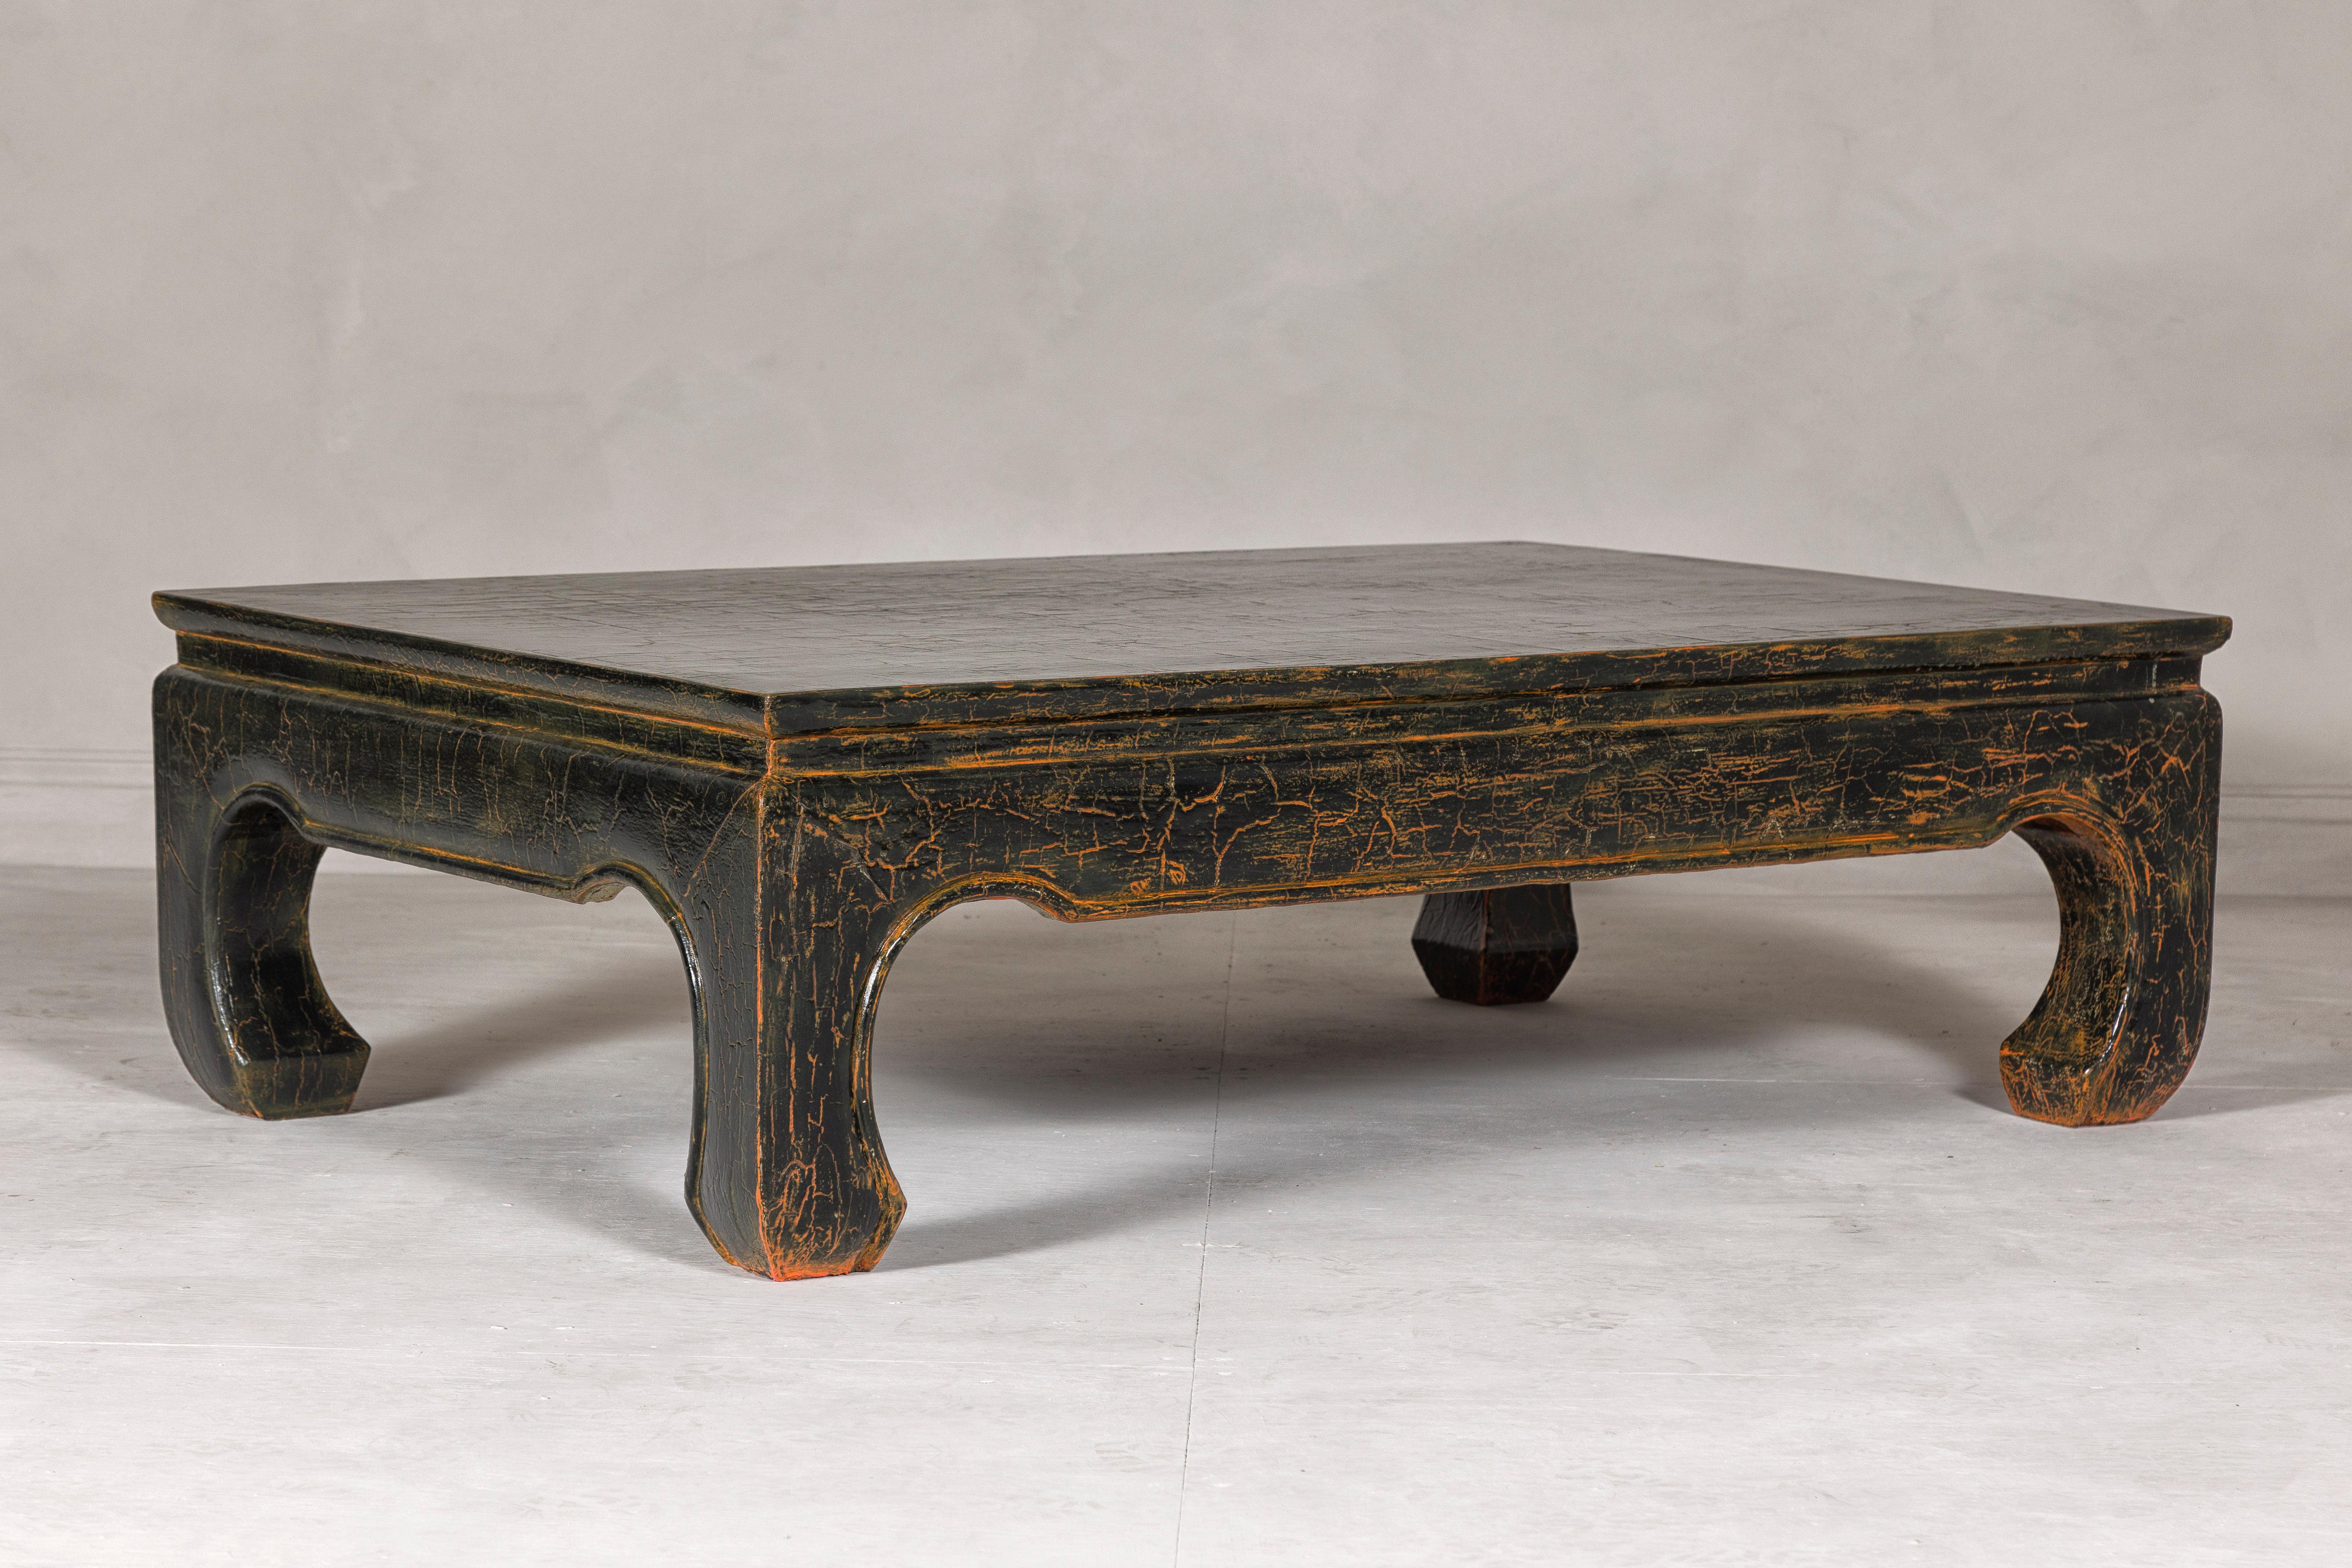 Vintage Chow Legs Distressed Black Coffee Table with Crackle Orange Finish For Sale 4